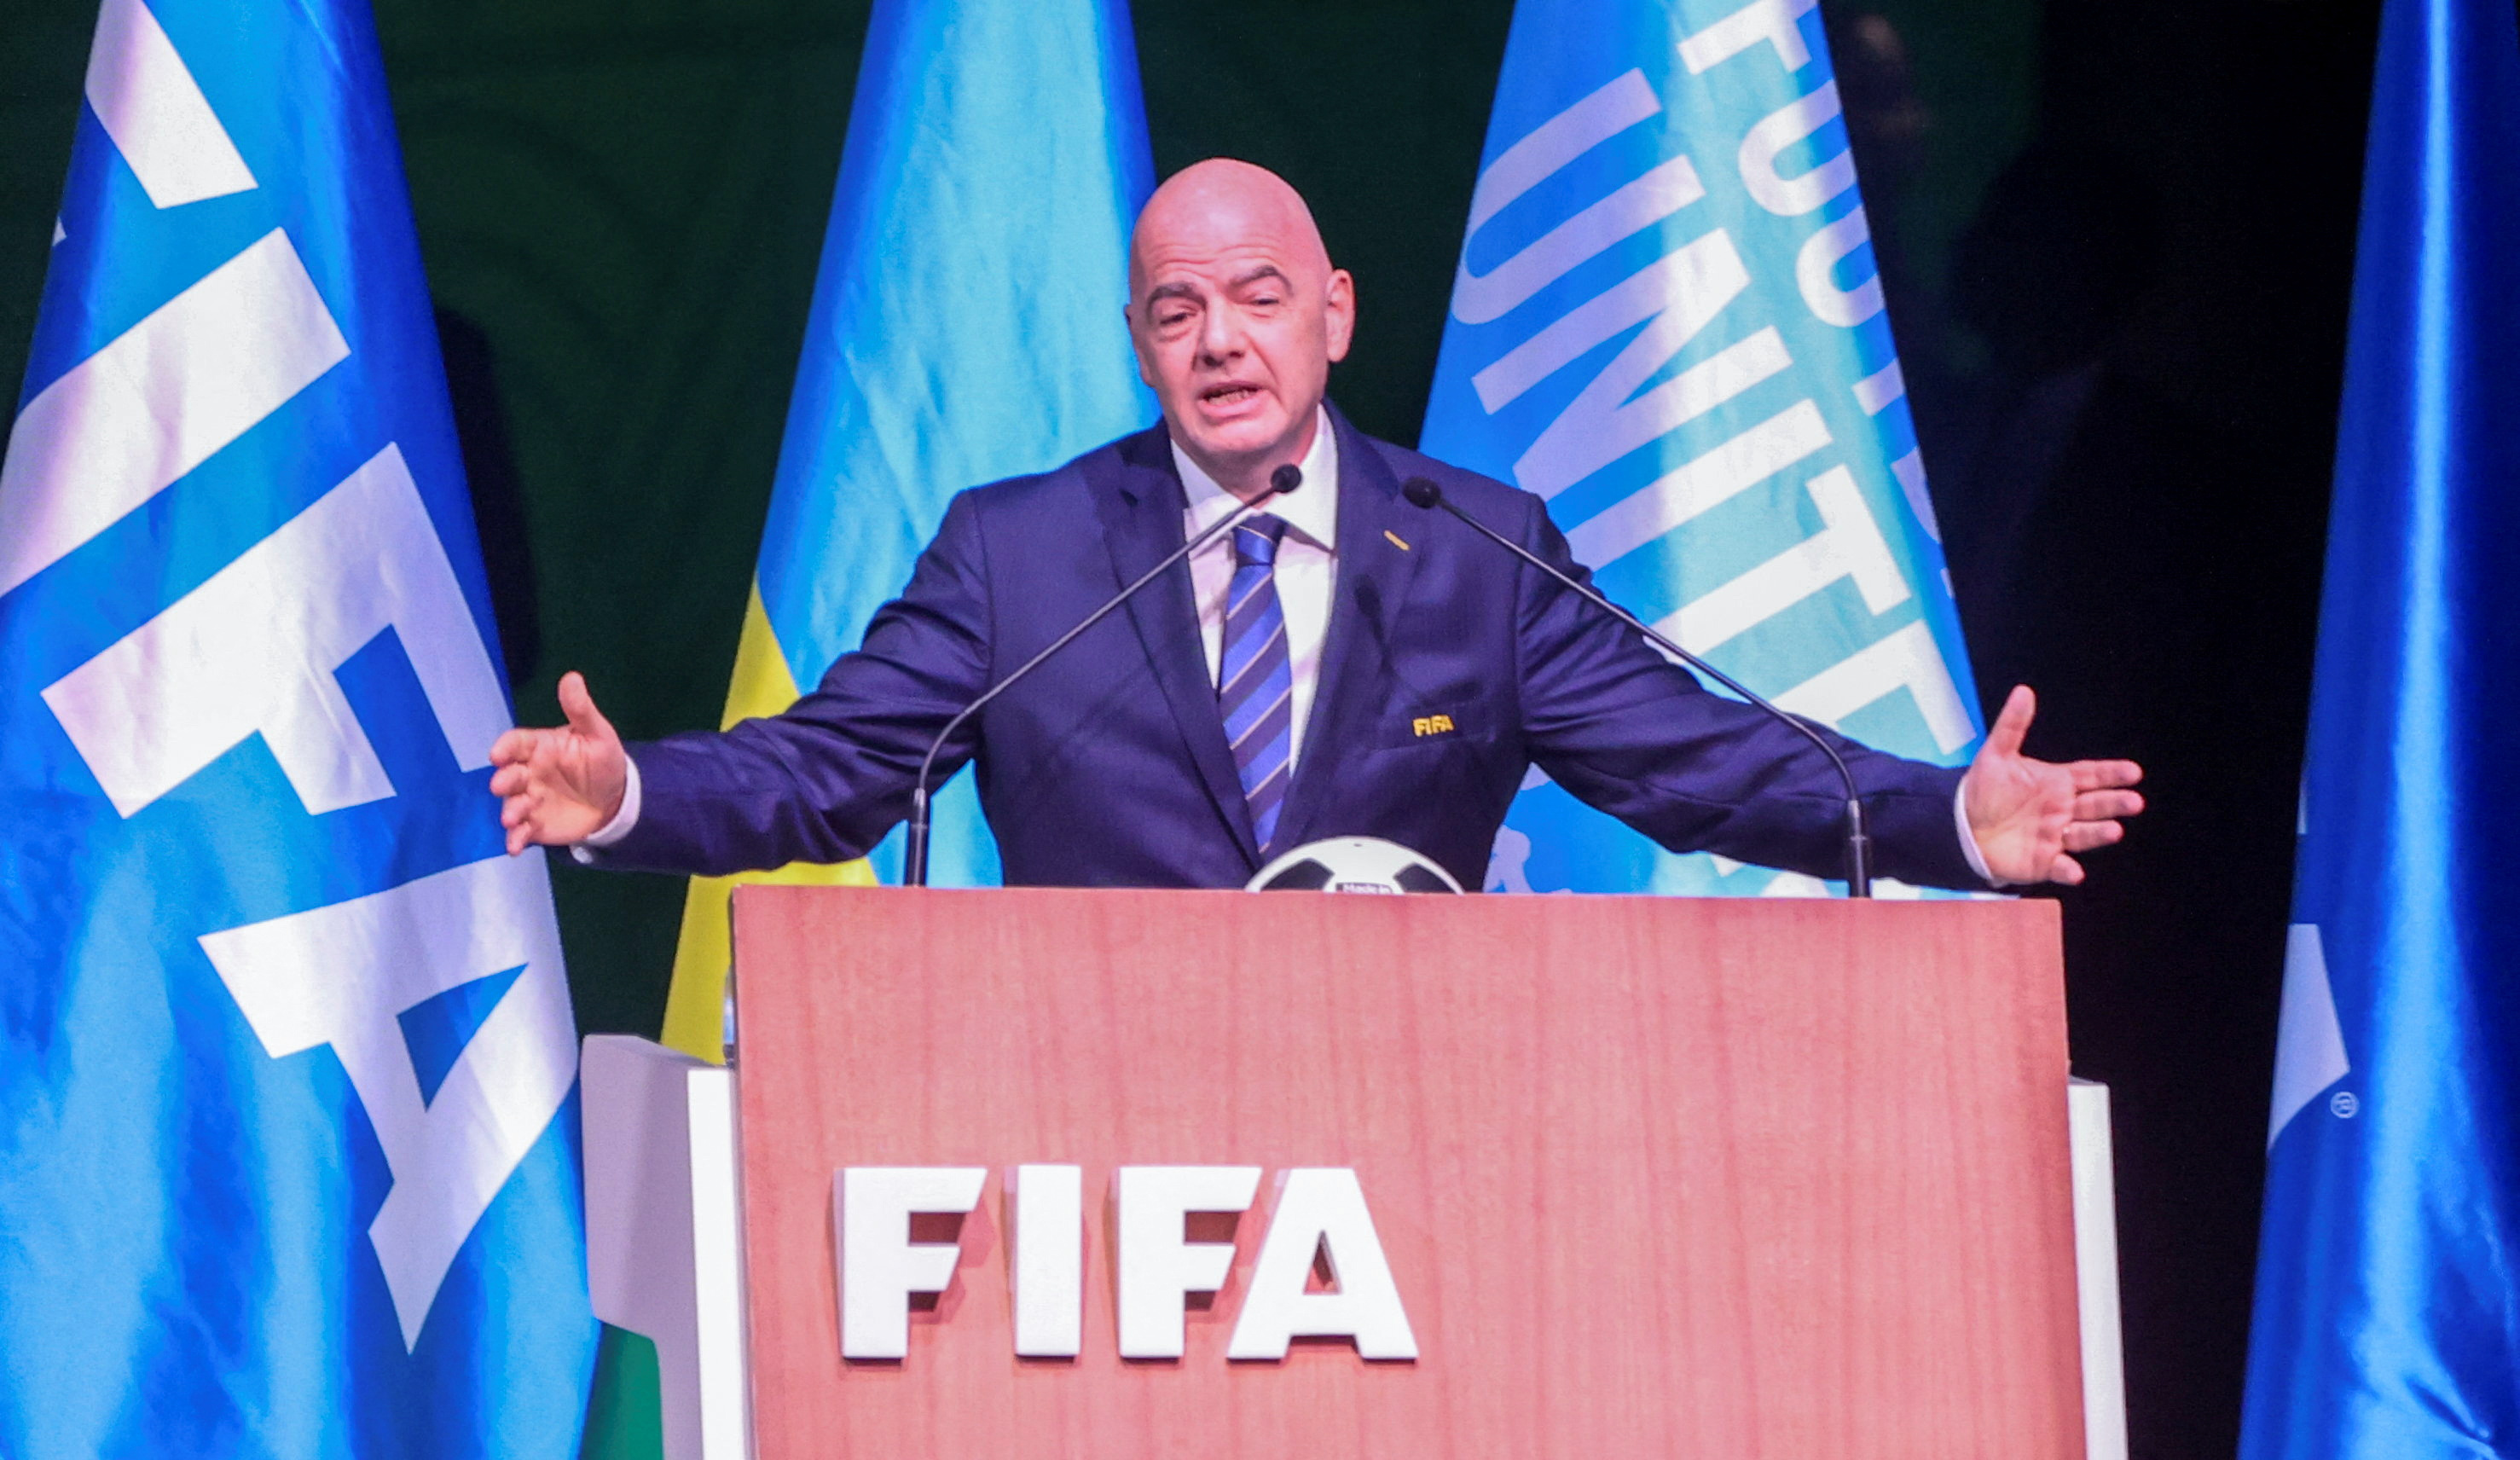 Infantino re-elected FIFA president, telling critics 'I love you all' |  Reuters